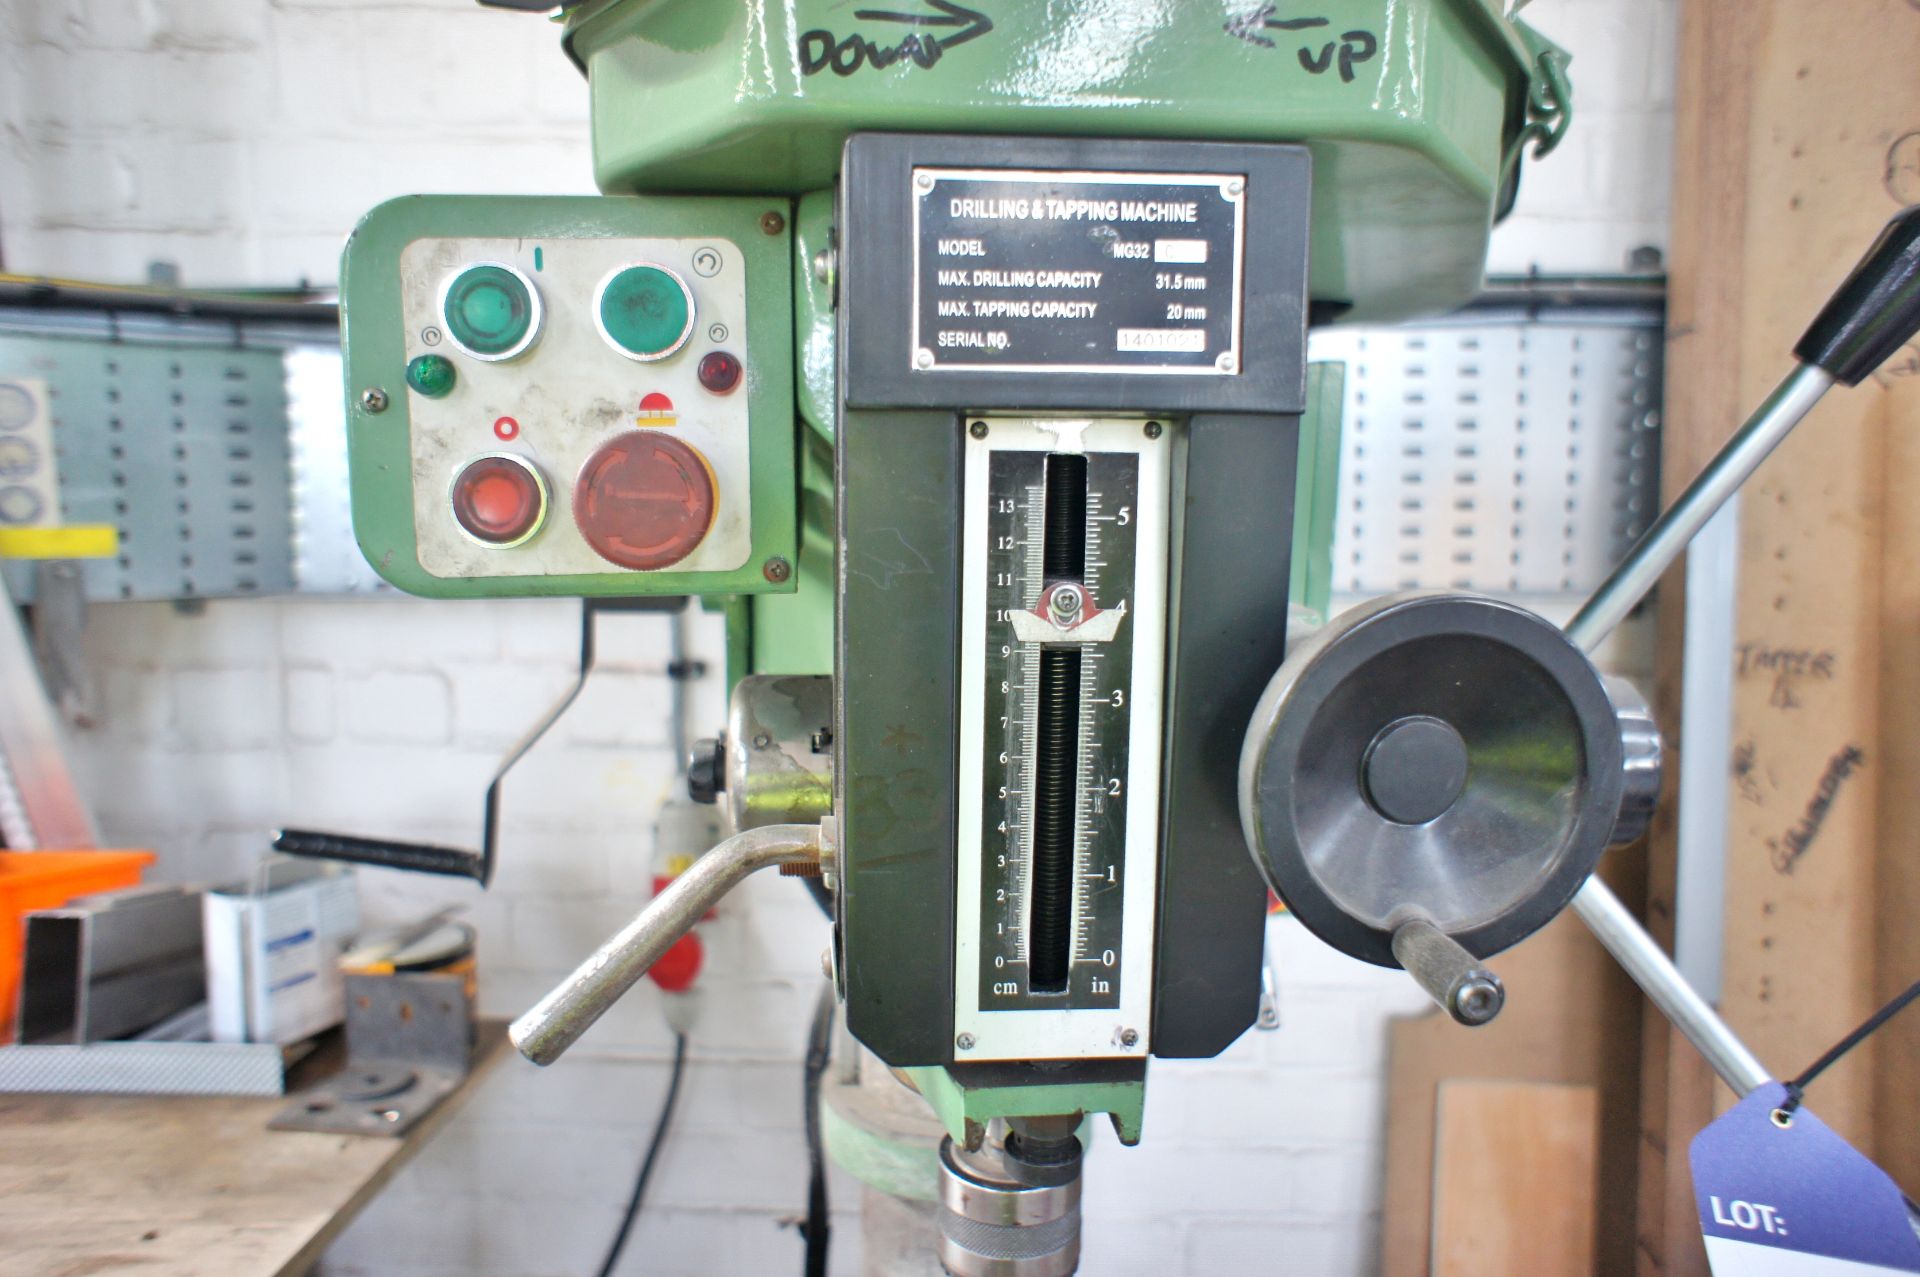 Bema MG32C Drilling / Tapping machine, s/n 1401021 - Image 3 of 5